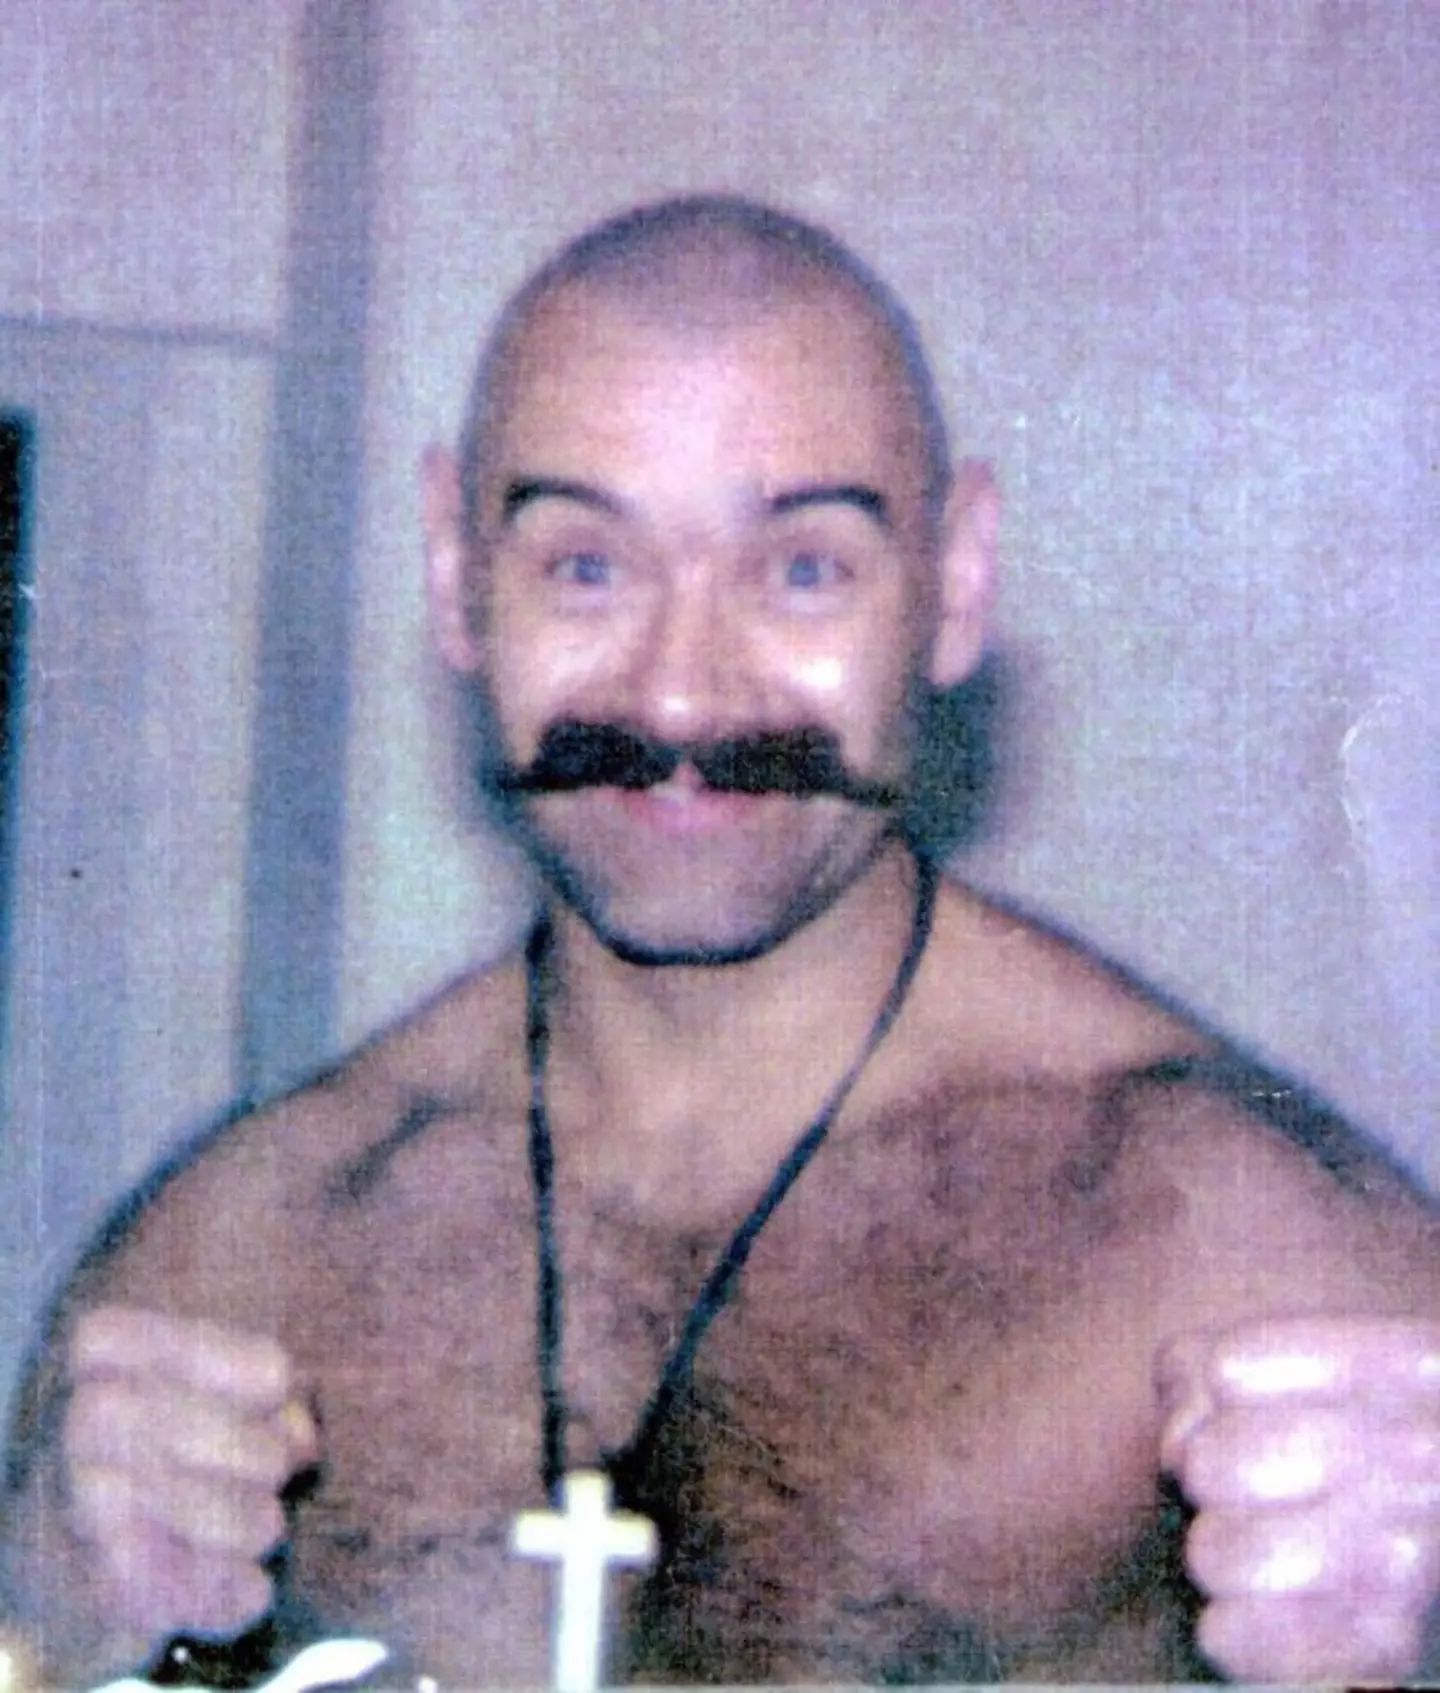 Bronson is known for his violent assaults.